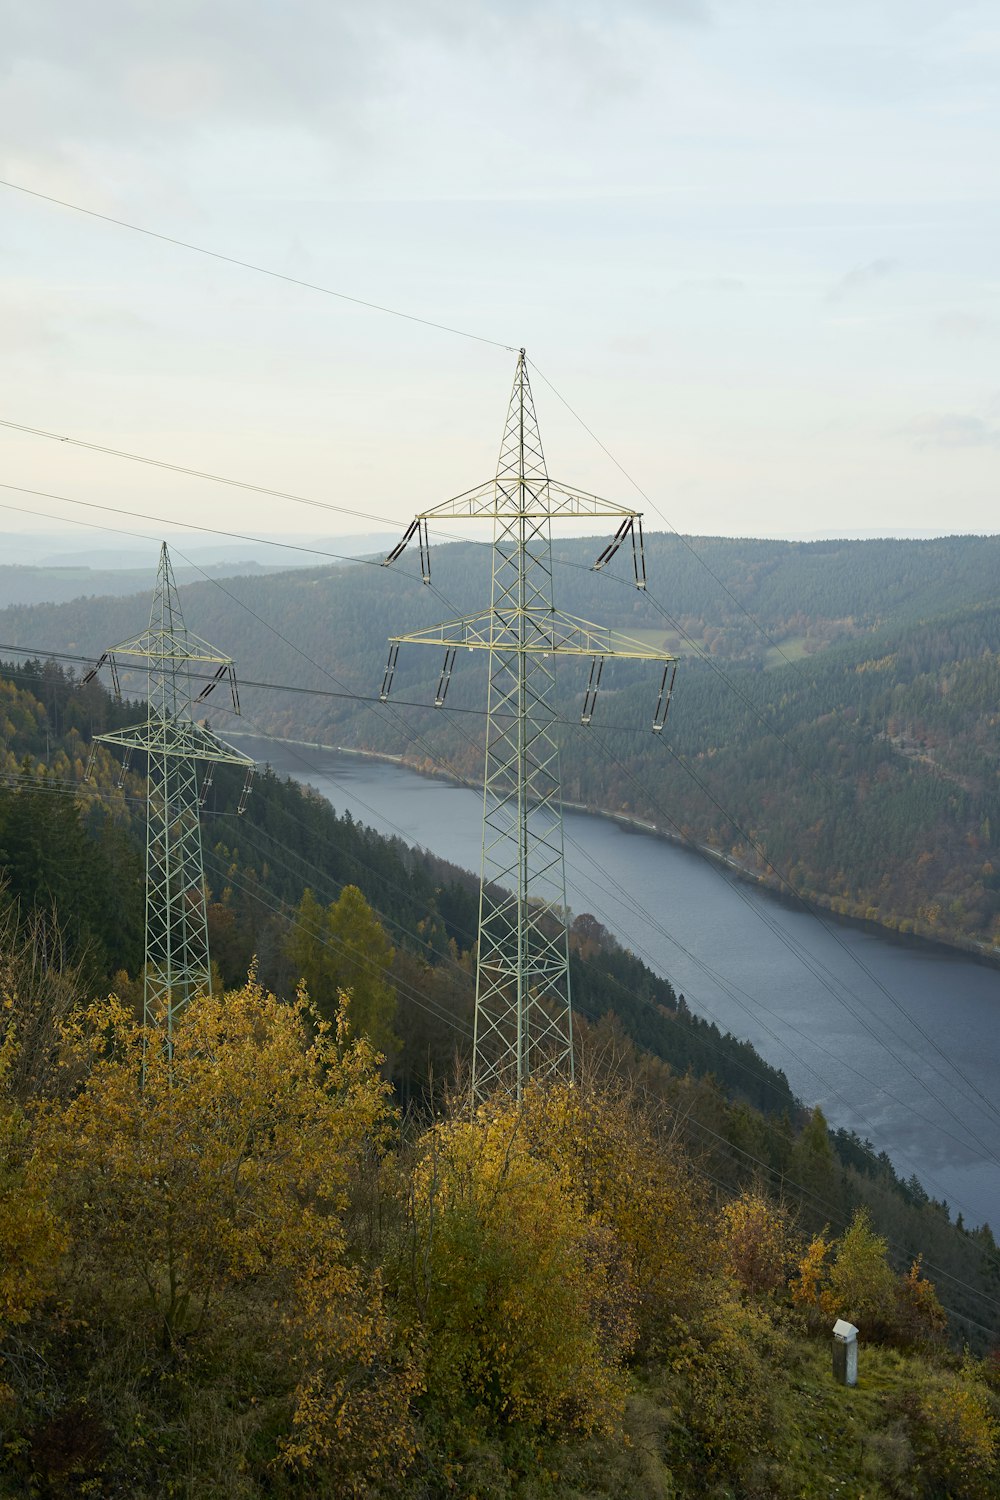 a view of a body of water and power lines